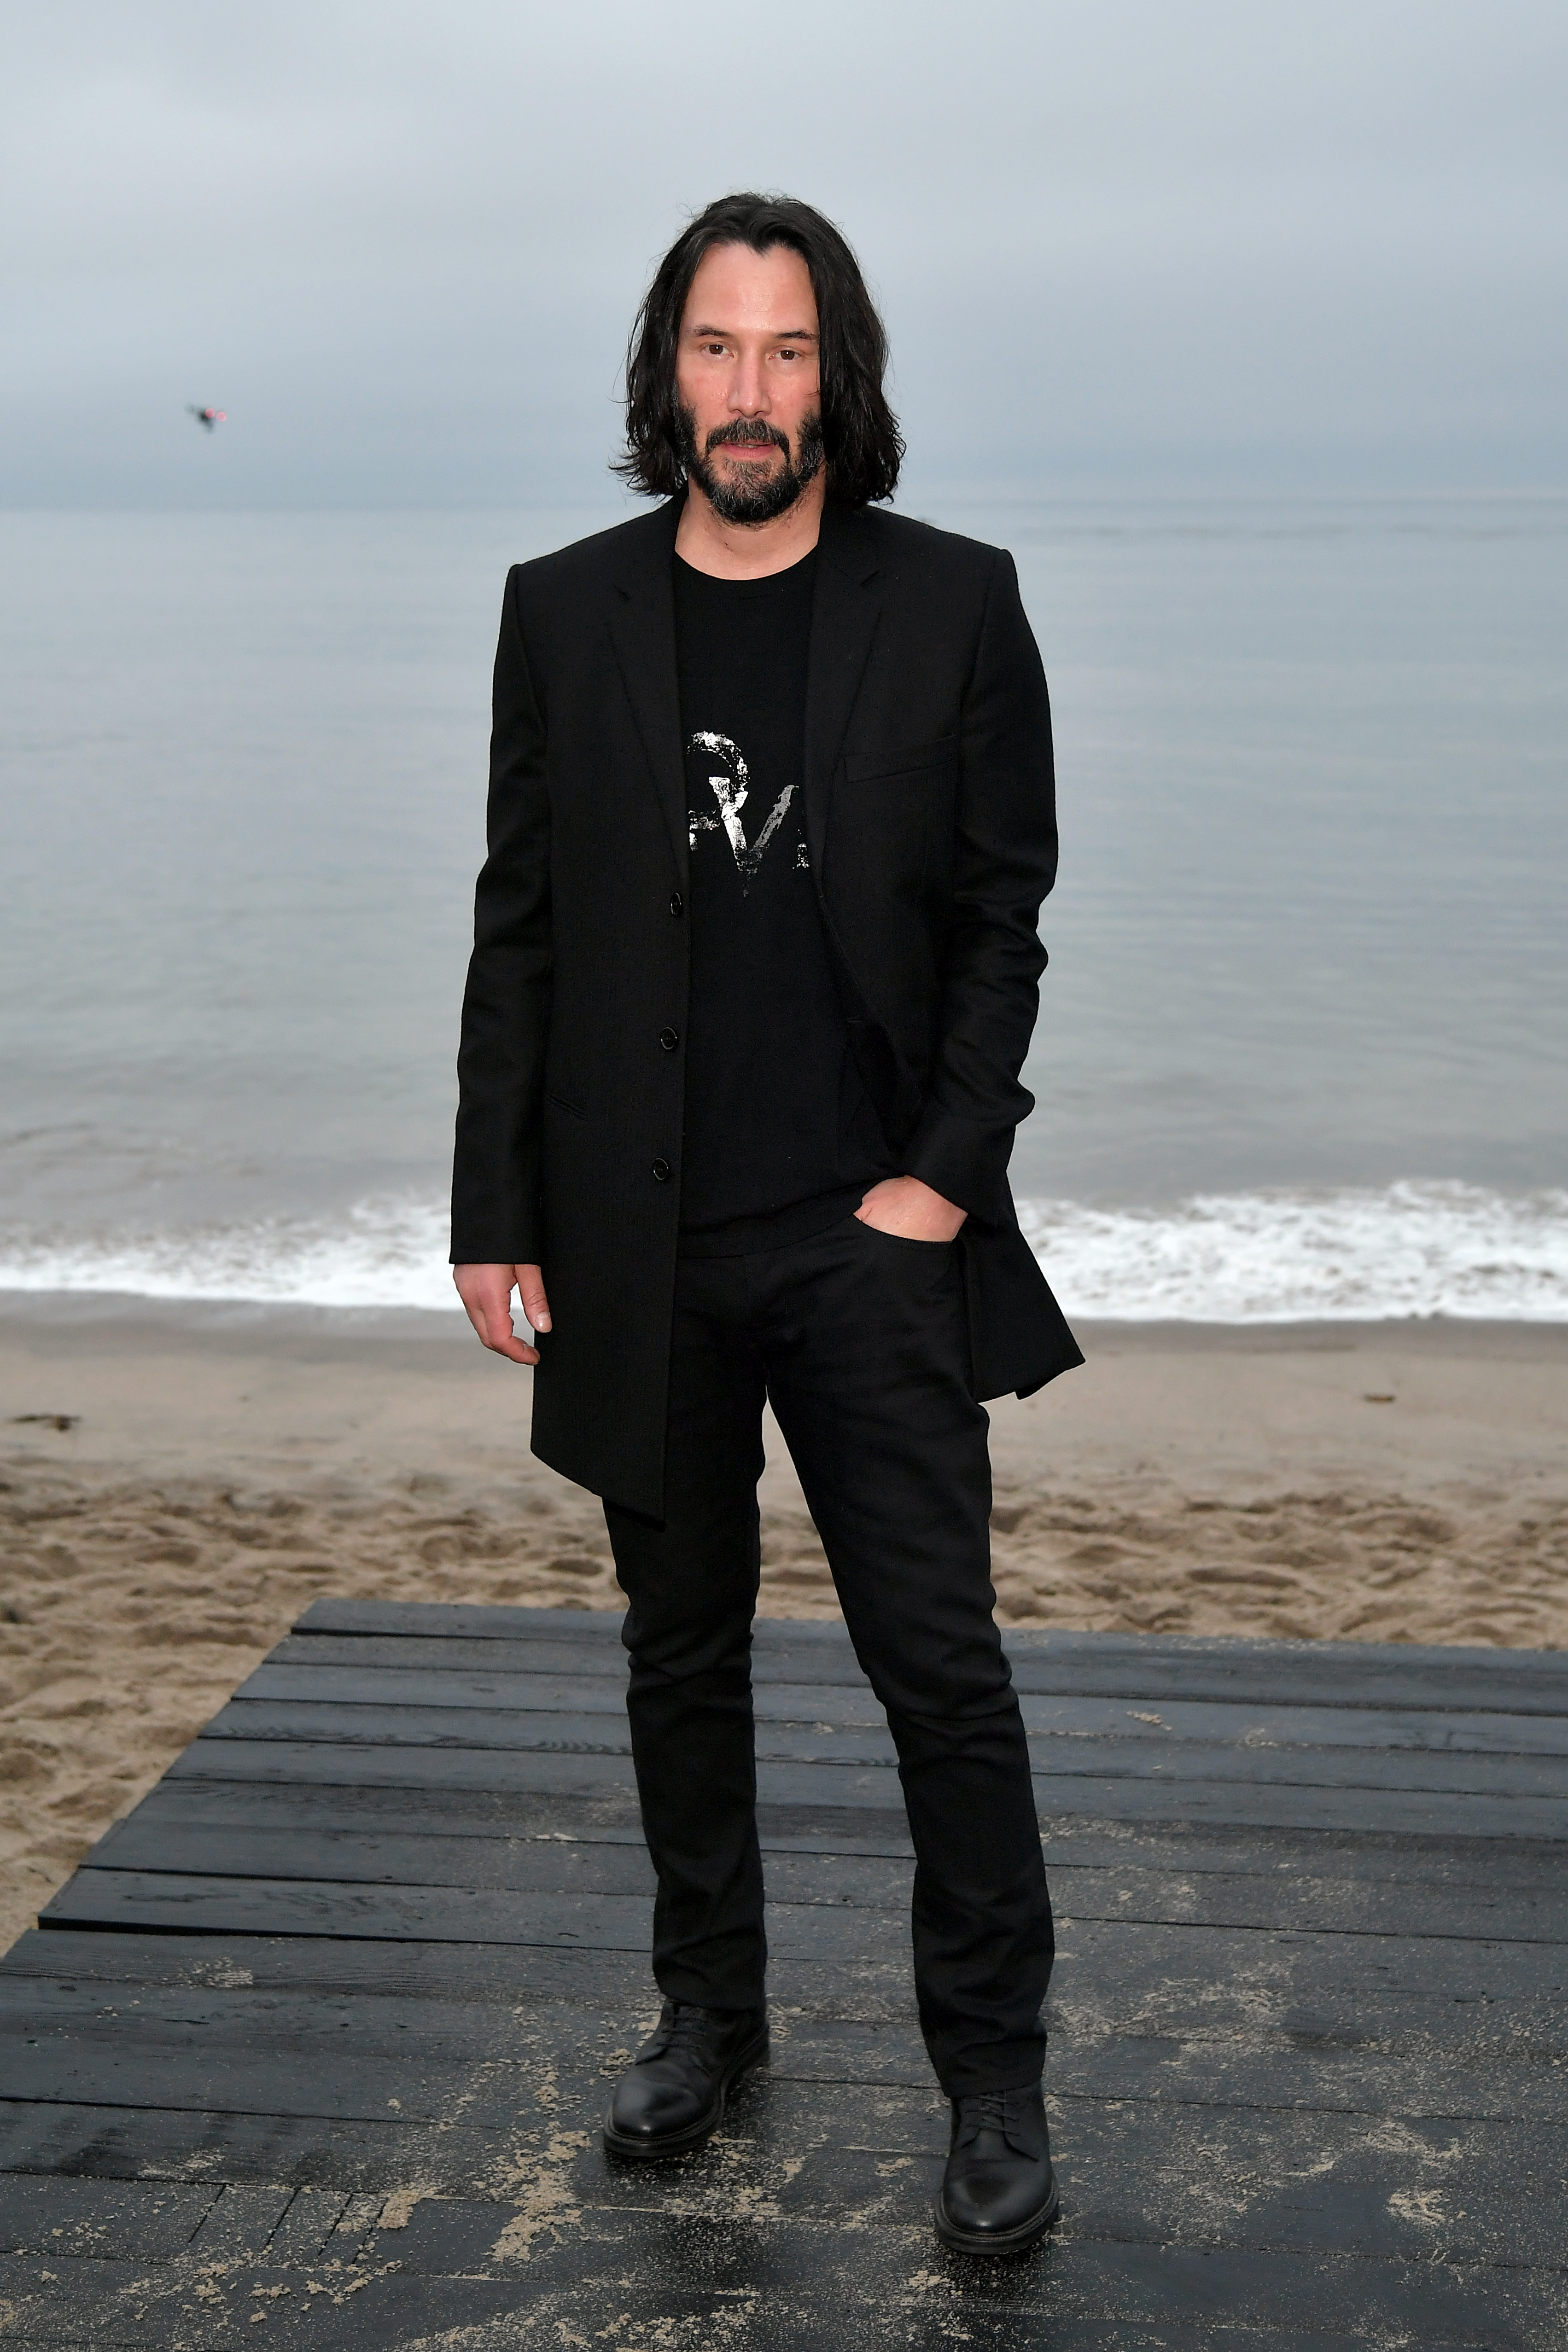 Keanu Reeves at the Saint Laurent Mens Spring Summer 20 Show on June 6, 2019 in Paradise Cove Malibu, California | Source: Getty Images